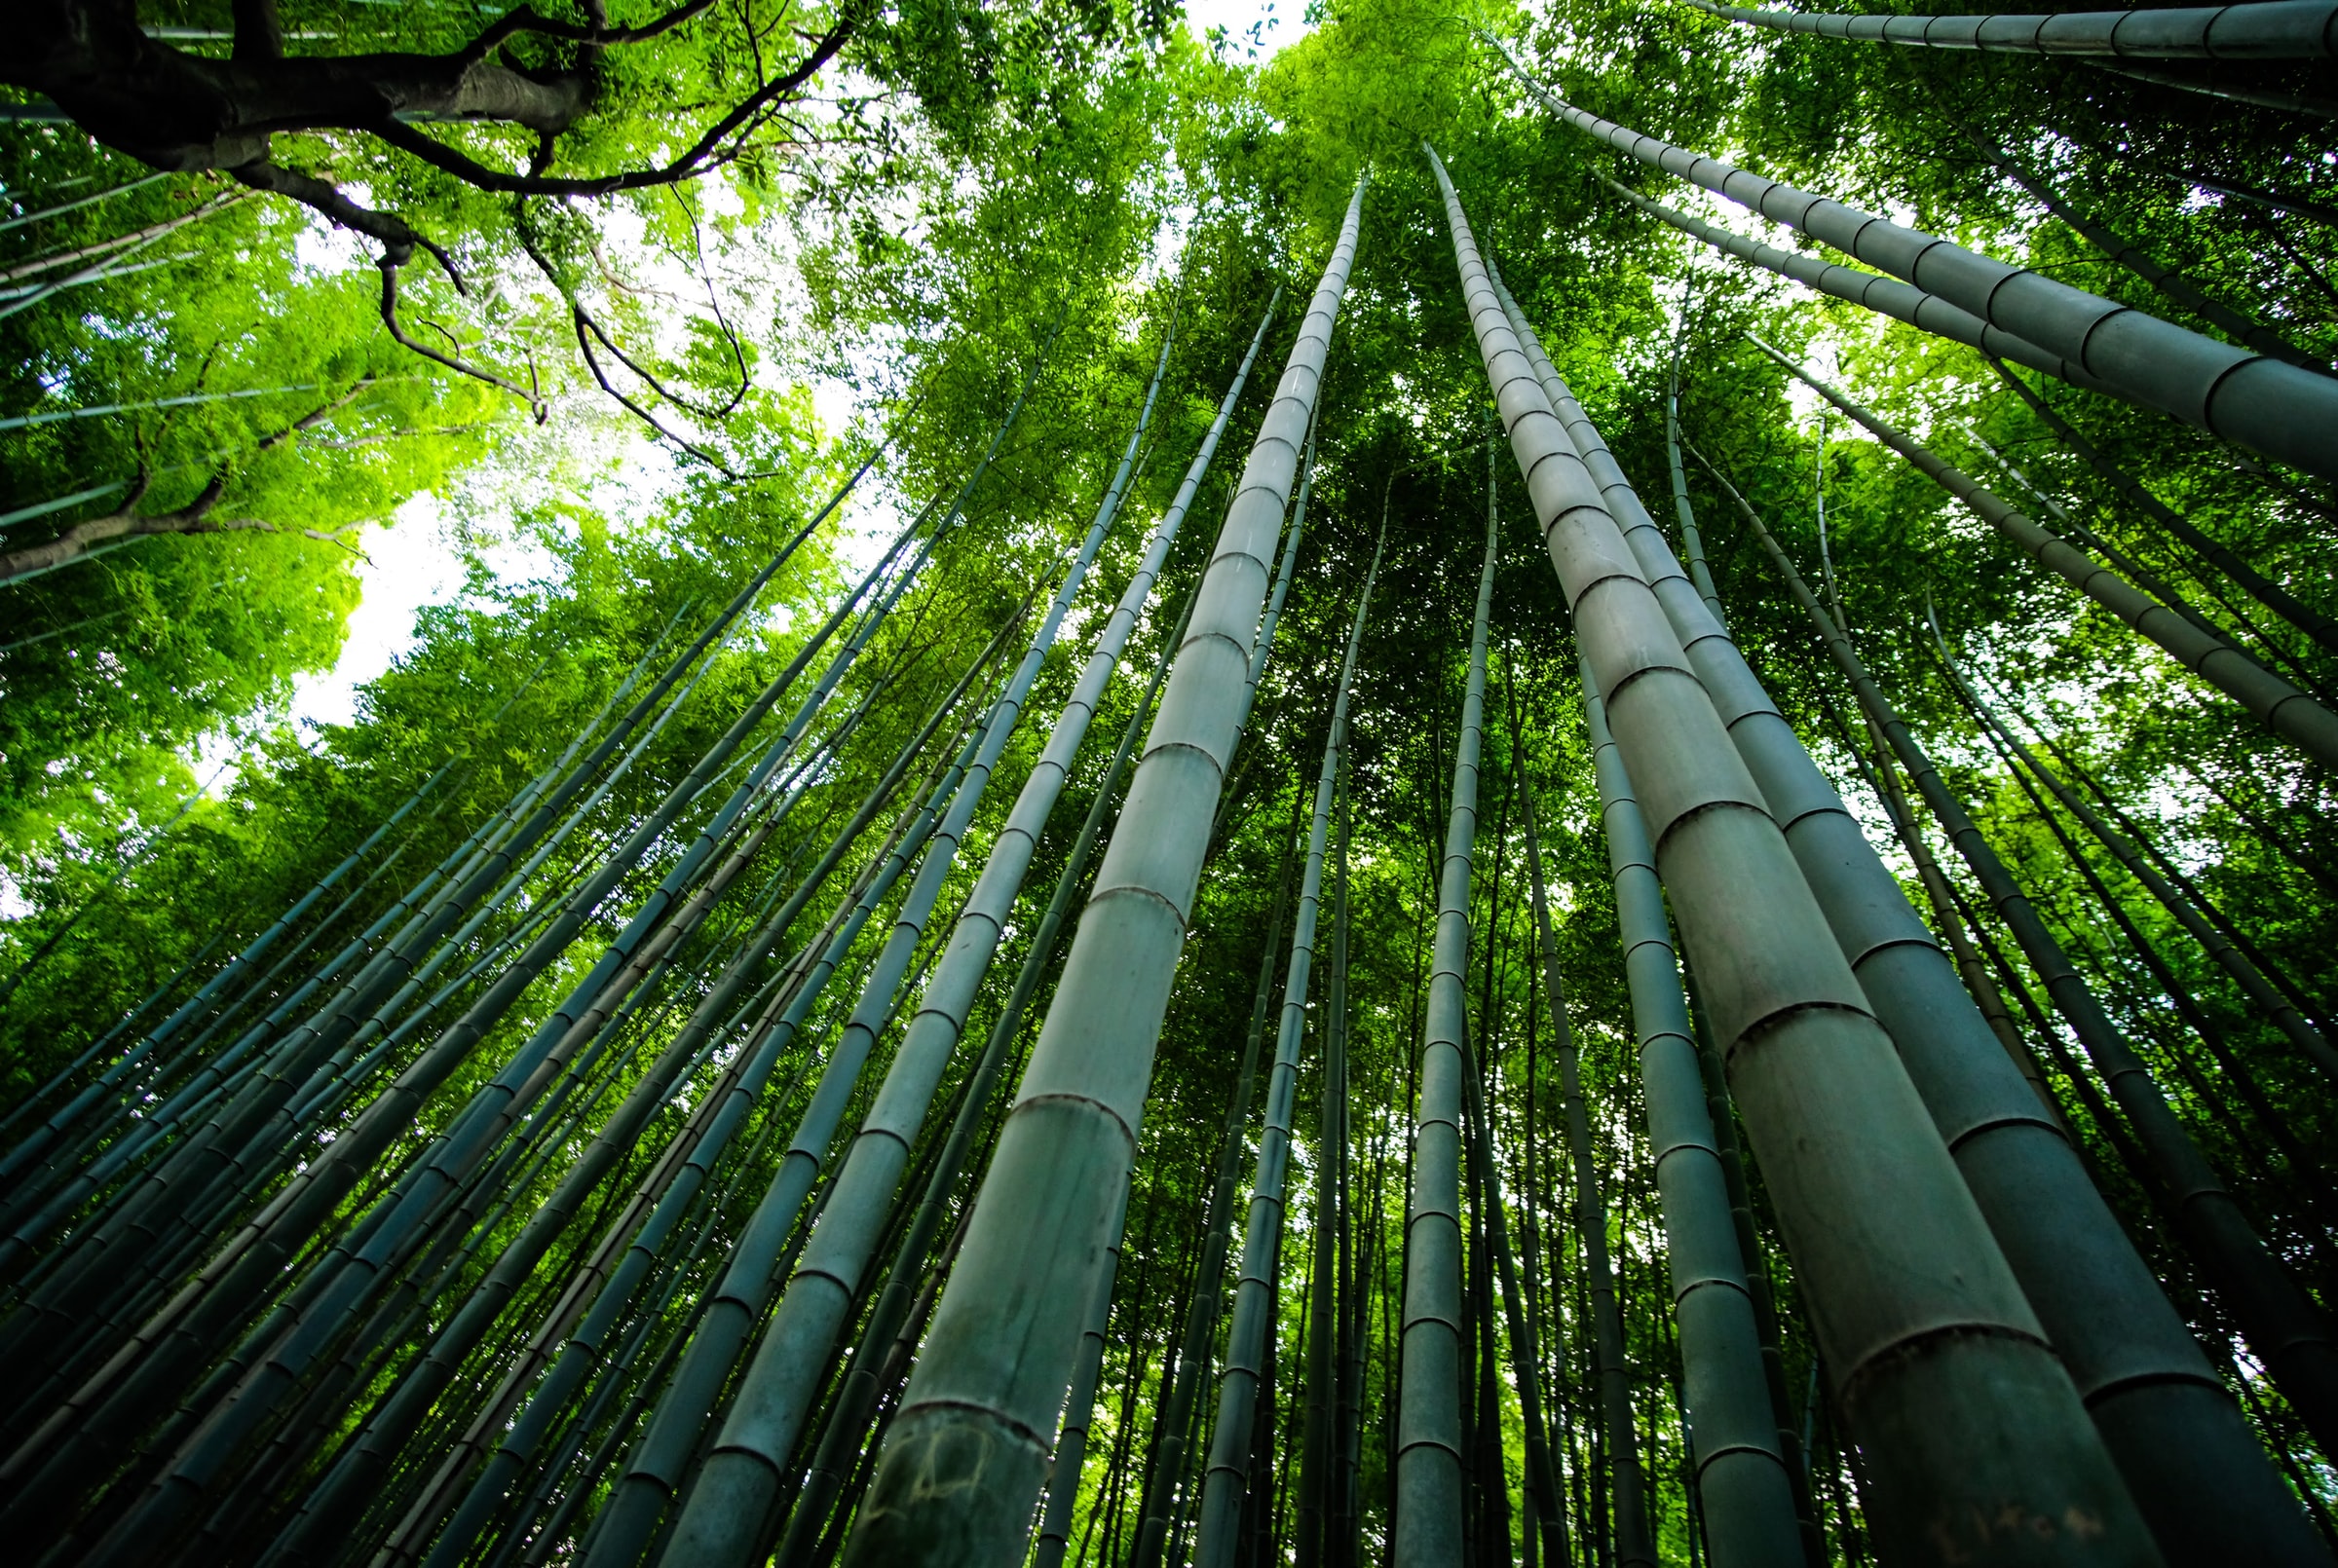 Moving Beyond Wood Pulp Part 2: Bamboo